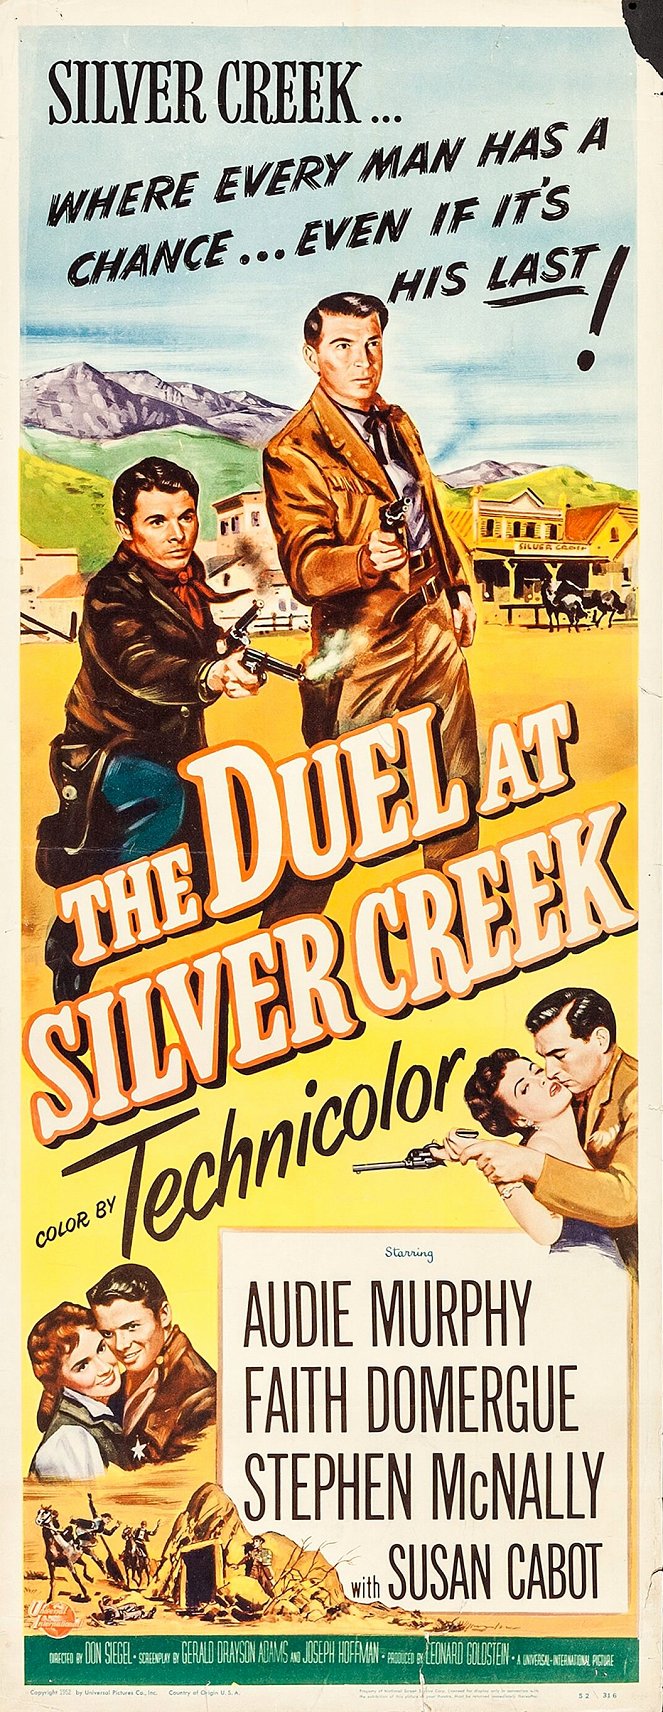 The Duel at Silver Creek - Affiches